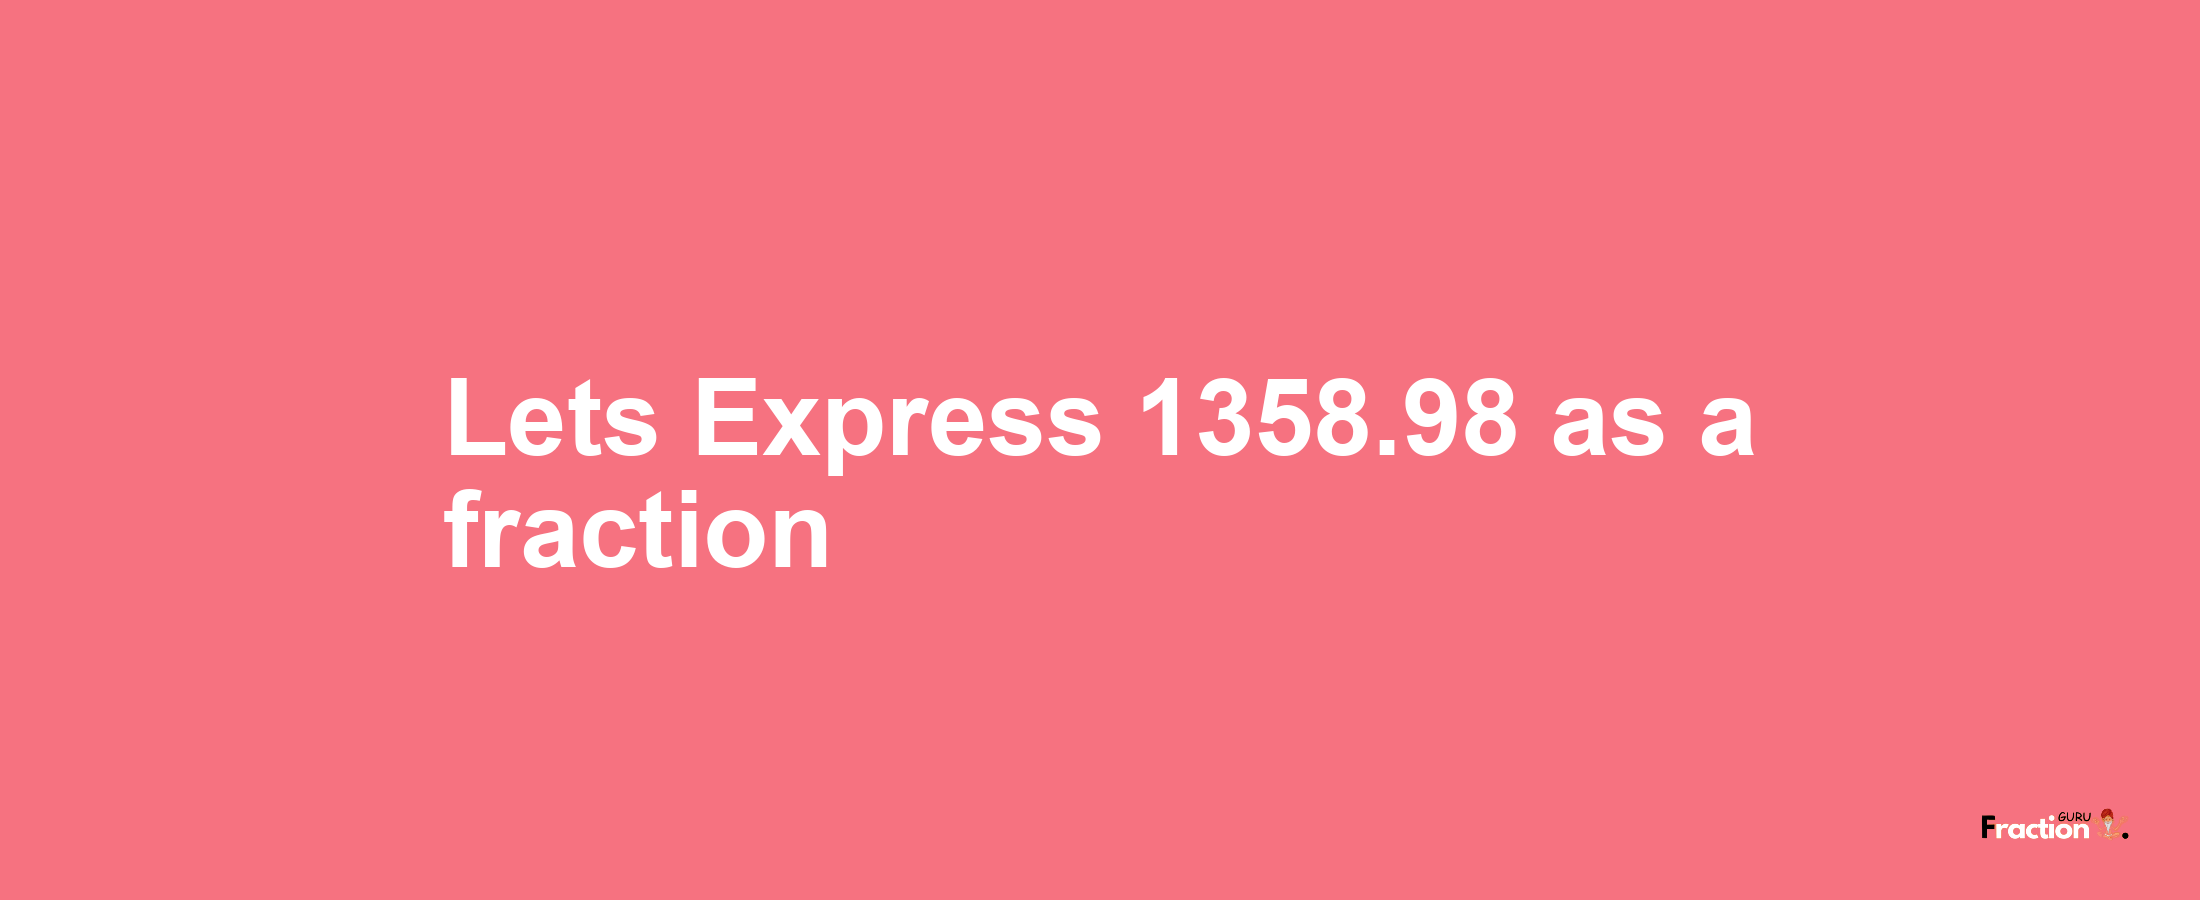 Lets Express 1358.98 as afraction